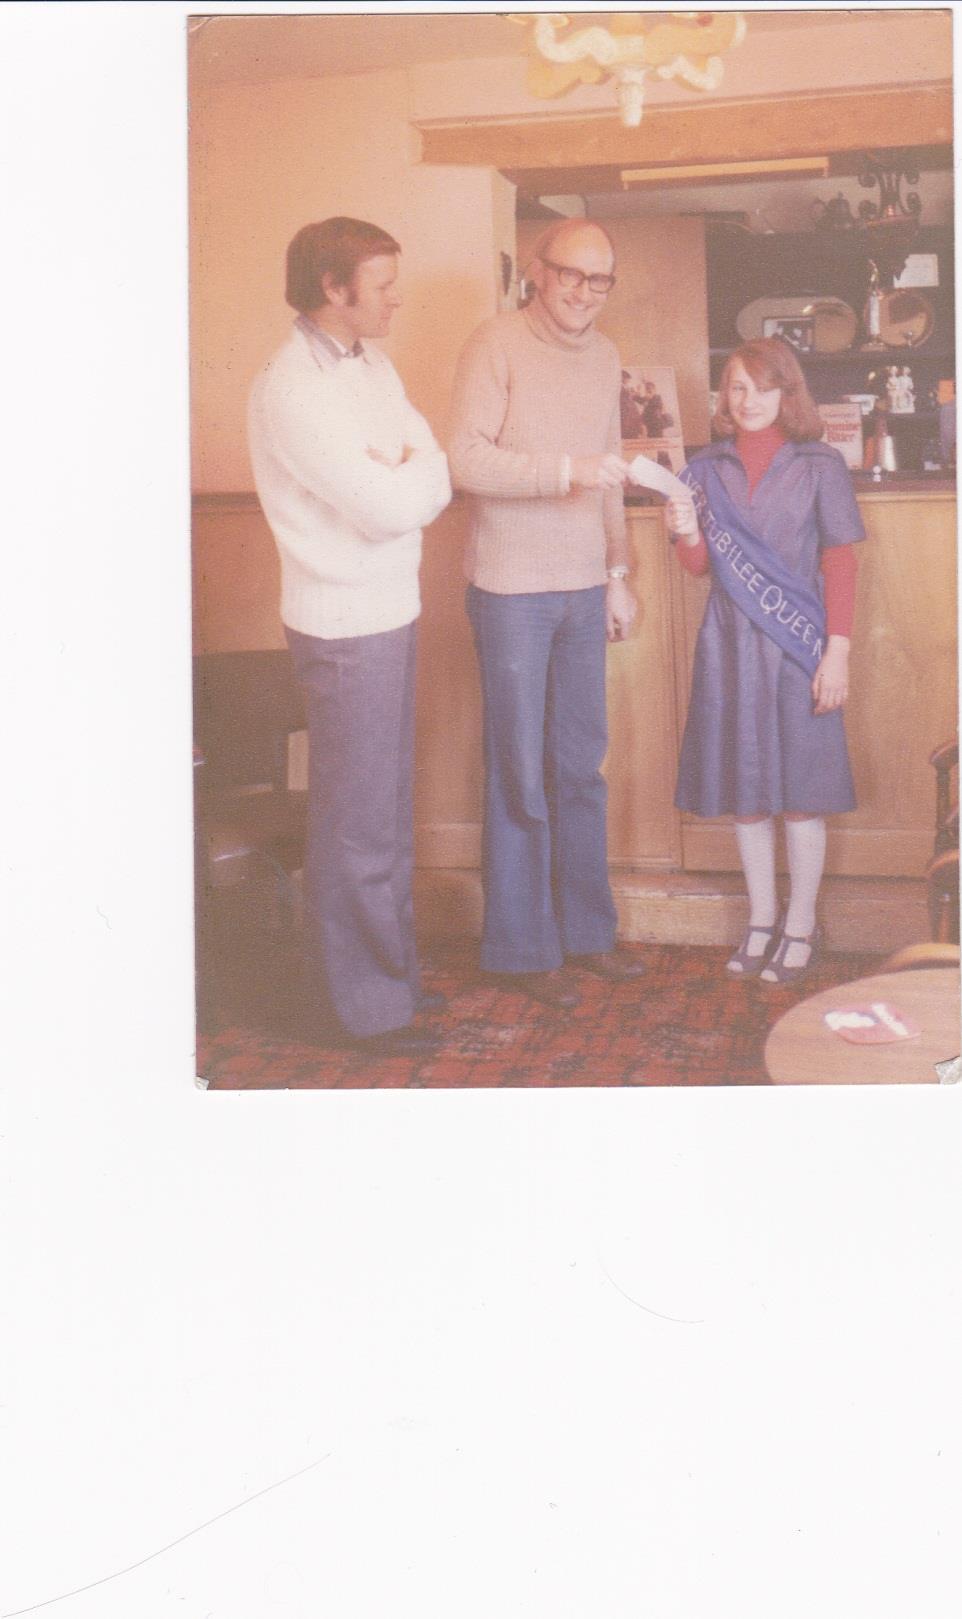 From left to right are Tony Garland, Brian Moody and Julie Cummins. (The photograph is courtesy of Dougie Mack.